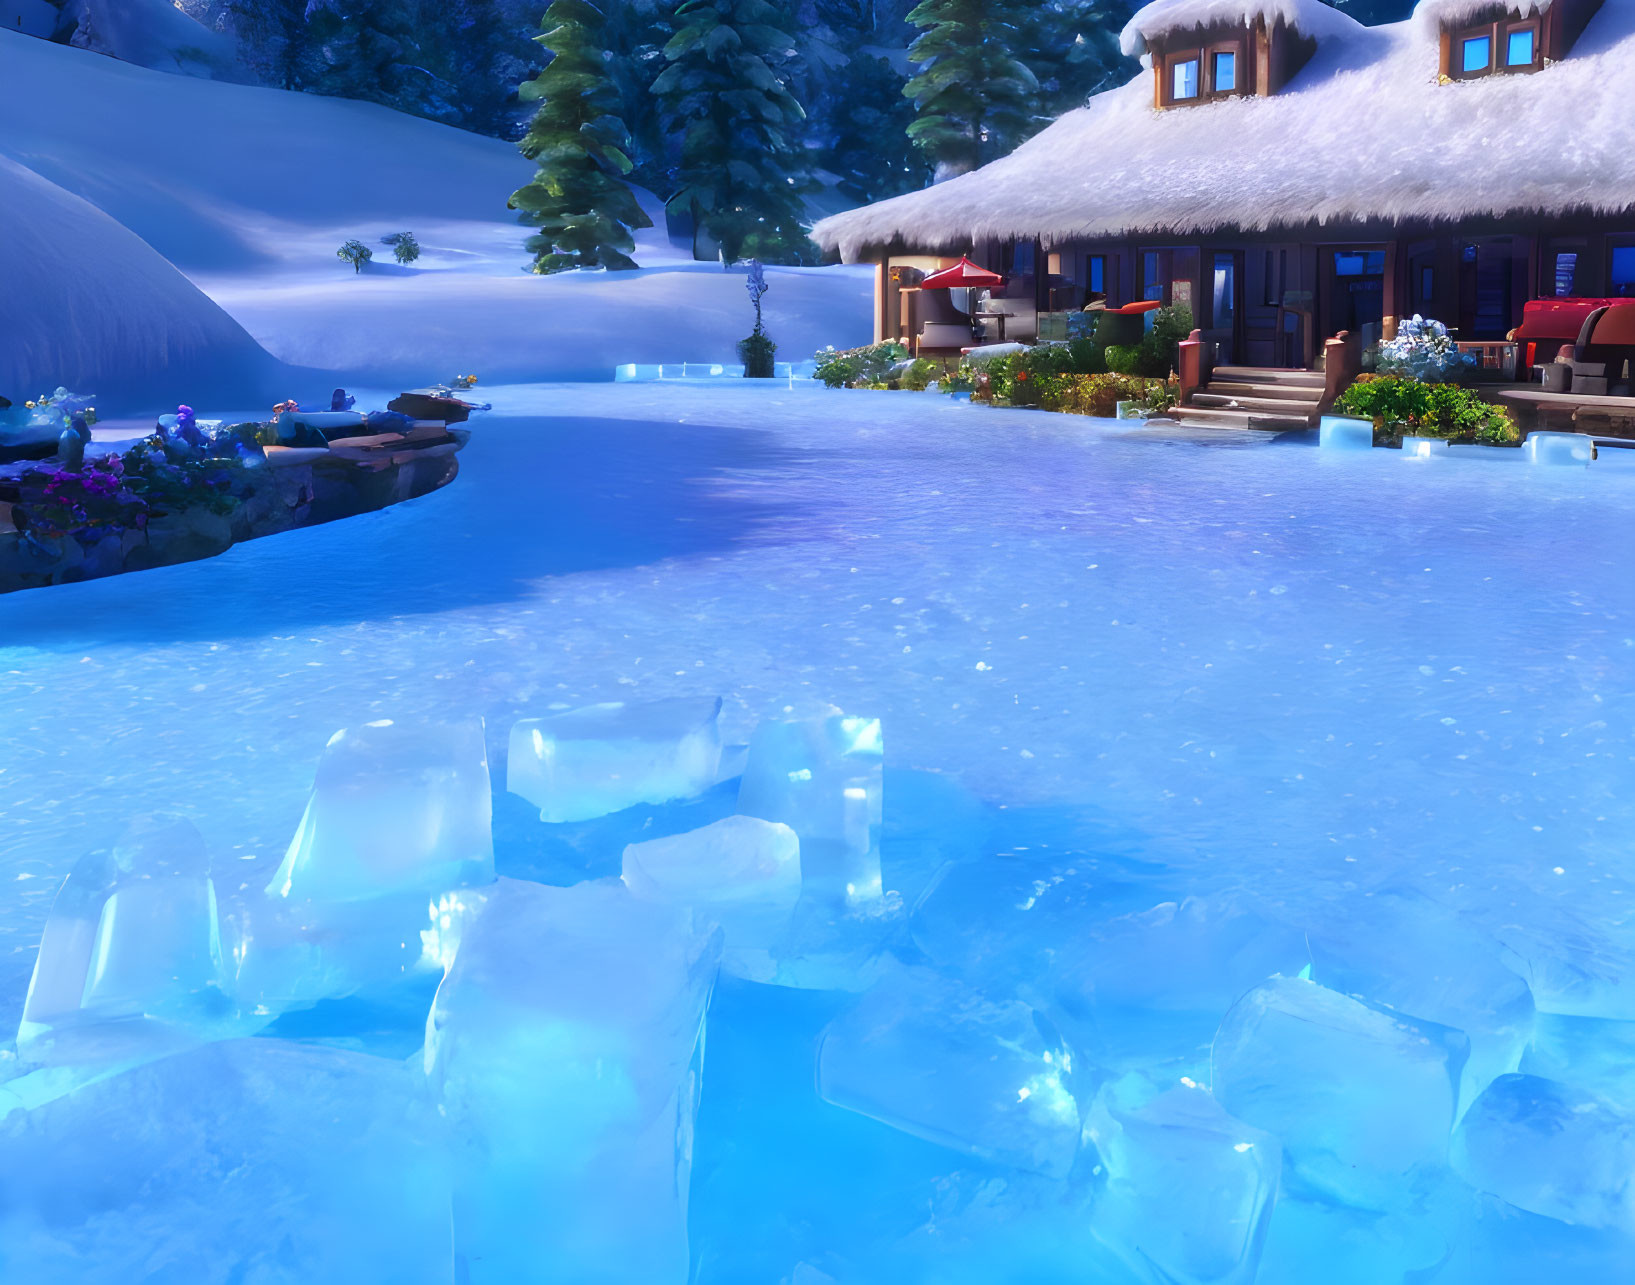 The icy house !